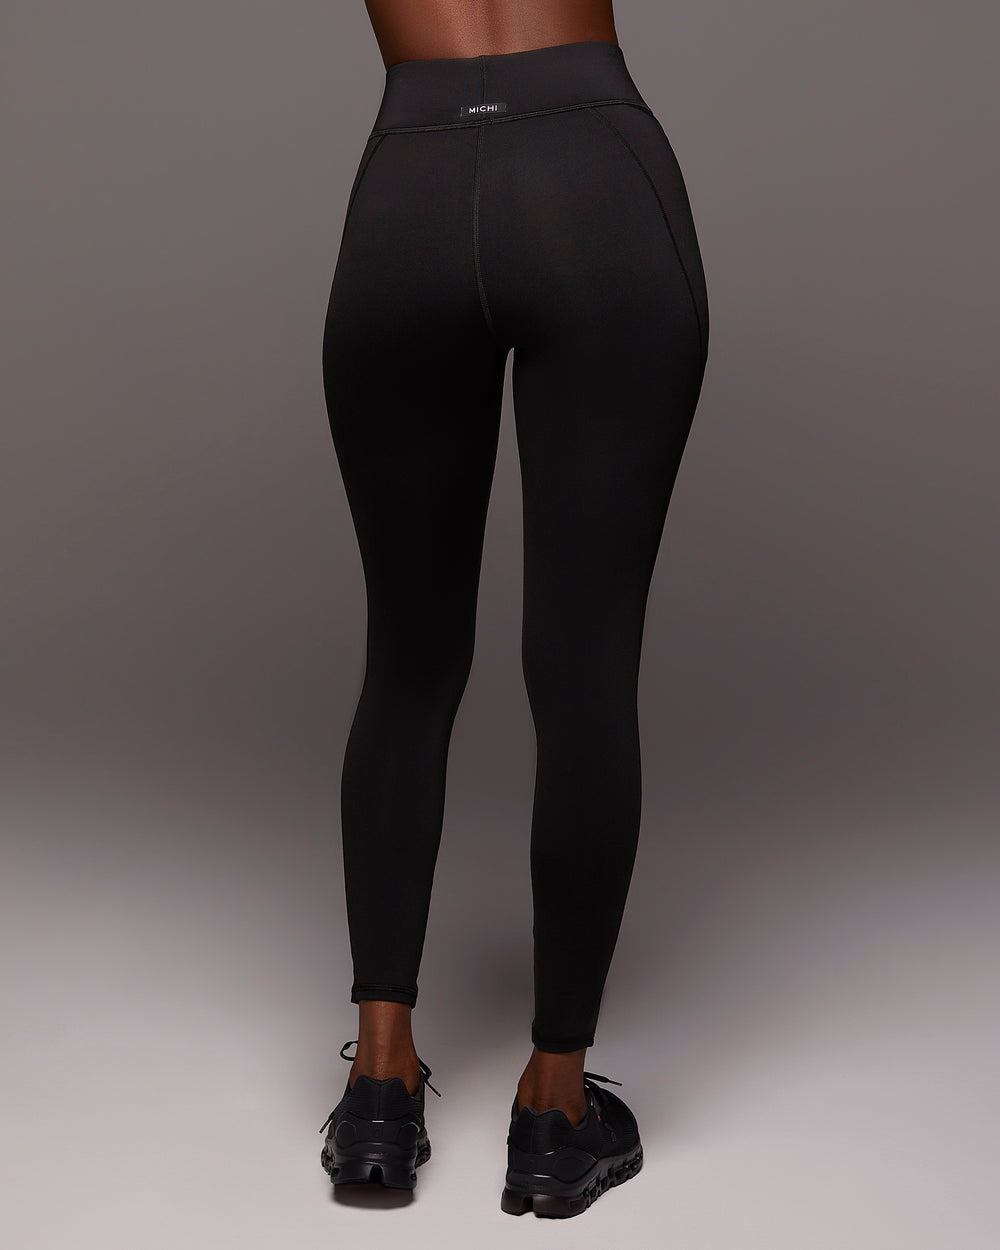 Running Leggings | Women's Activewear | The Sports Edit | tagged 